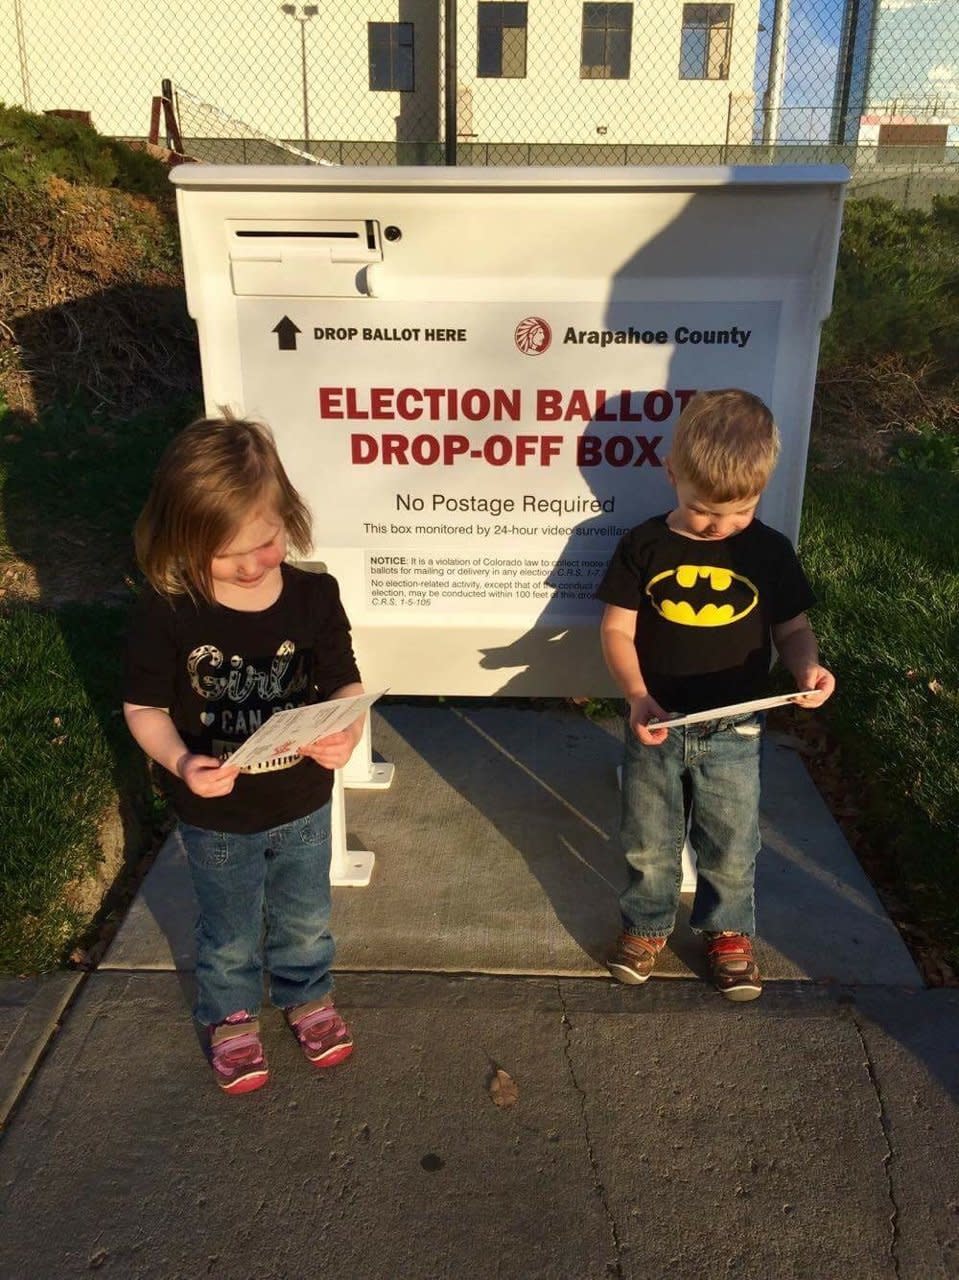 In Colorado, almost everyone is voting by mail-in ballot this year. I took our nearly 3-year-old twins with me to drop off my ballot so they could learn about our civic duty. We also happened to talk about how they were helping mommy make history by voting for the first female president. "Girls Can Be Anything" was my favorite book as a kid so I read it to them for the first time before dropping off our ballots. And made sure to dress Lydia in a Girls Can Do Anything shirt for the occasion.